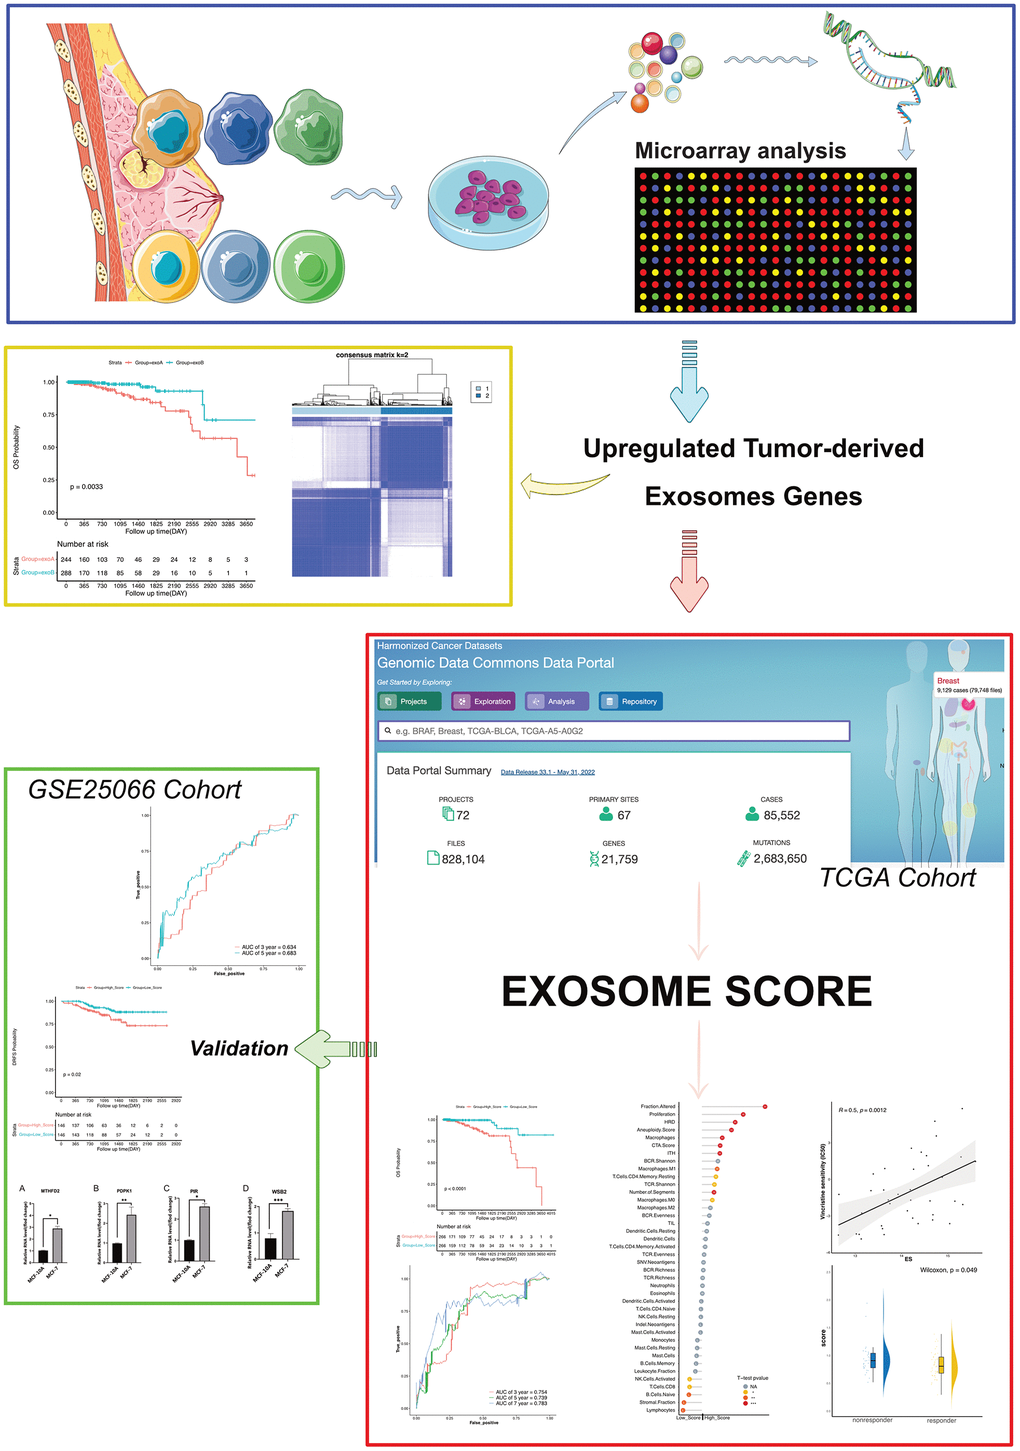 Strategy for identifying upregulated tumor-derived exosomes genes and exosomes score in this study.